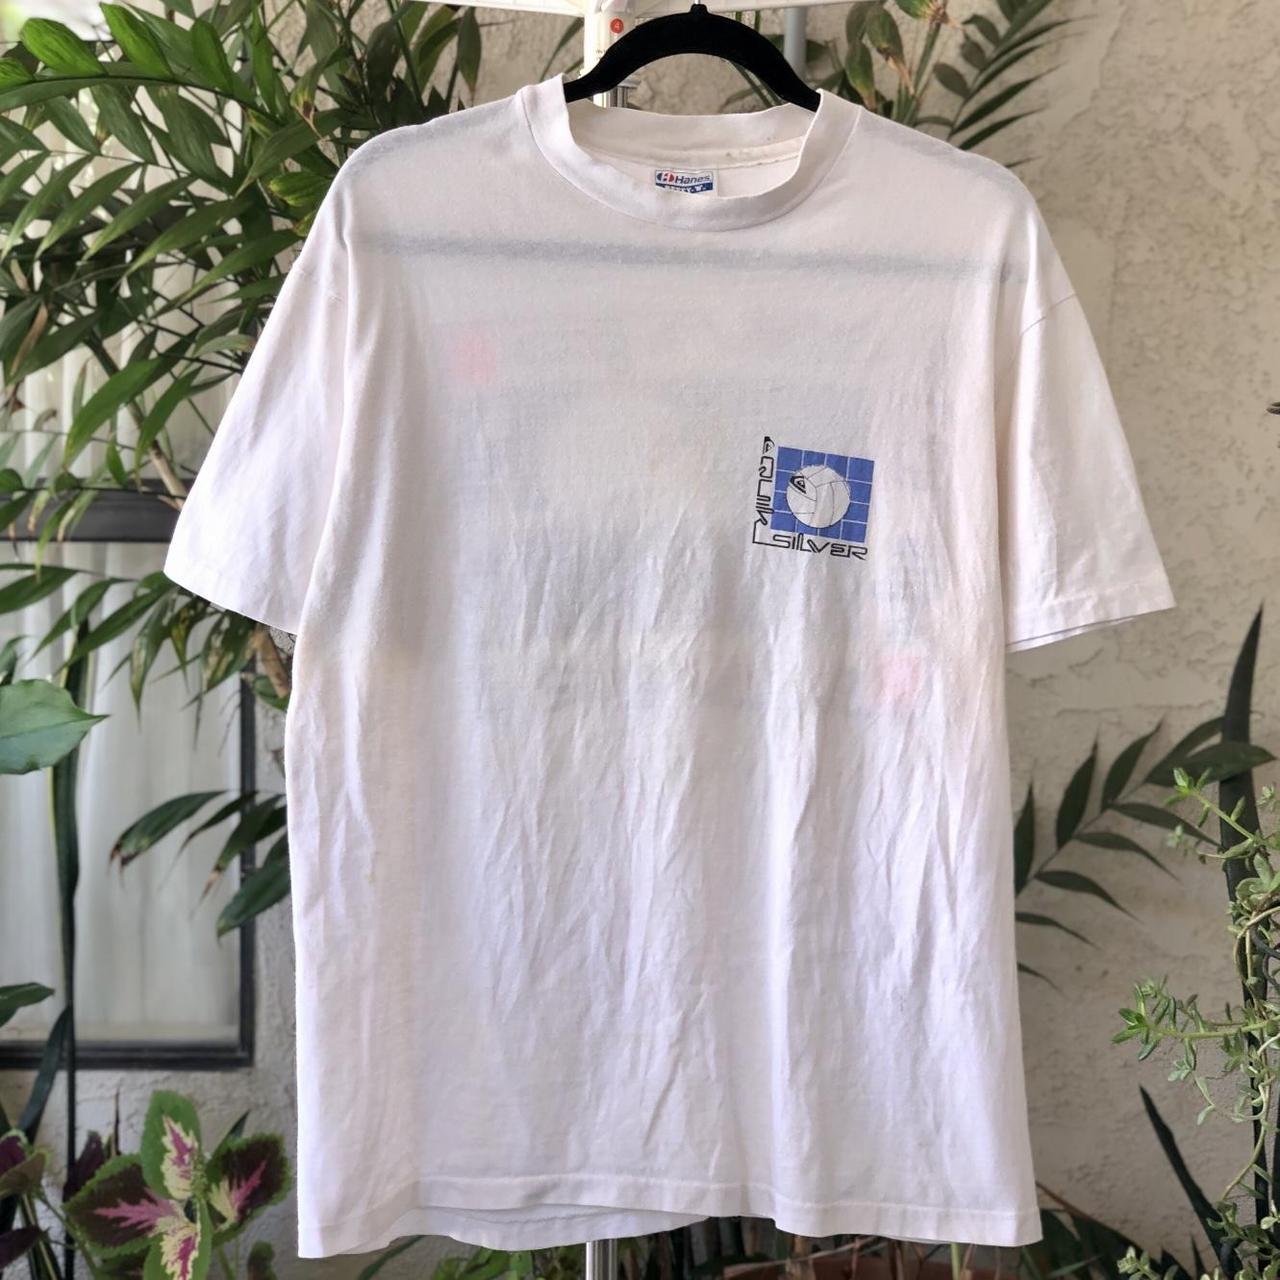 Vintage Hanes Quiksilver Volleyball Competition Tee... - Depop